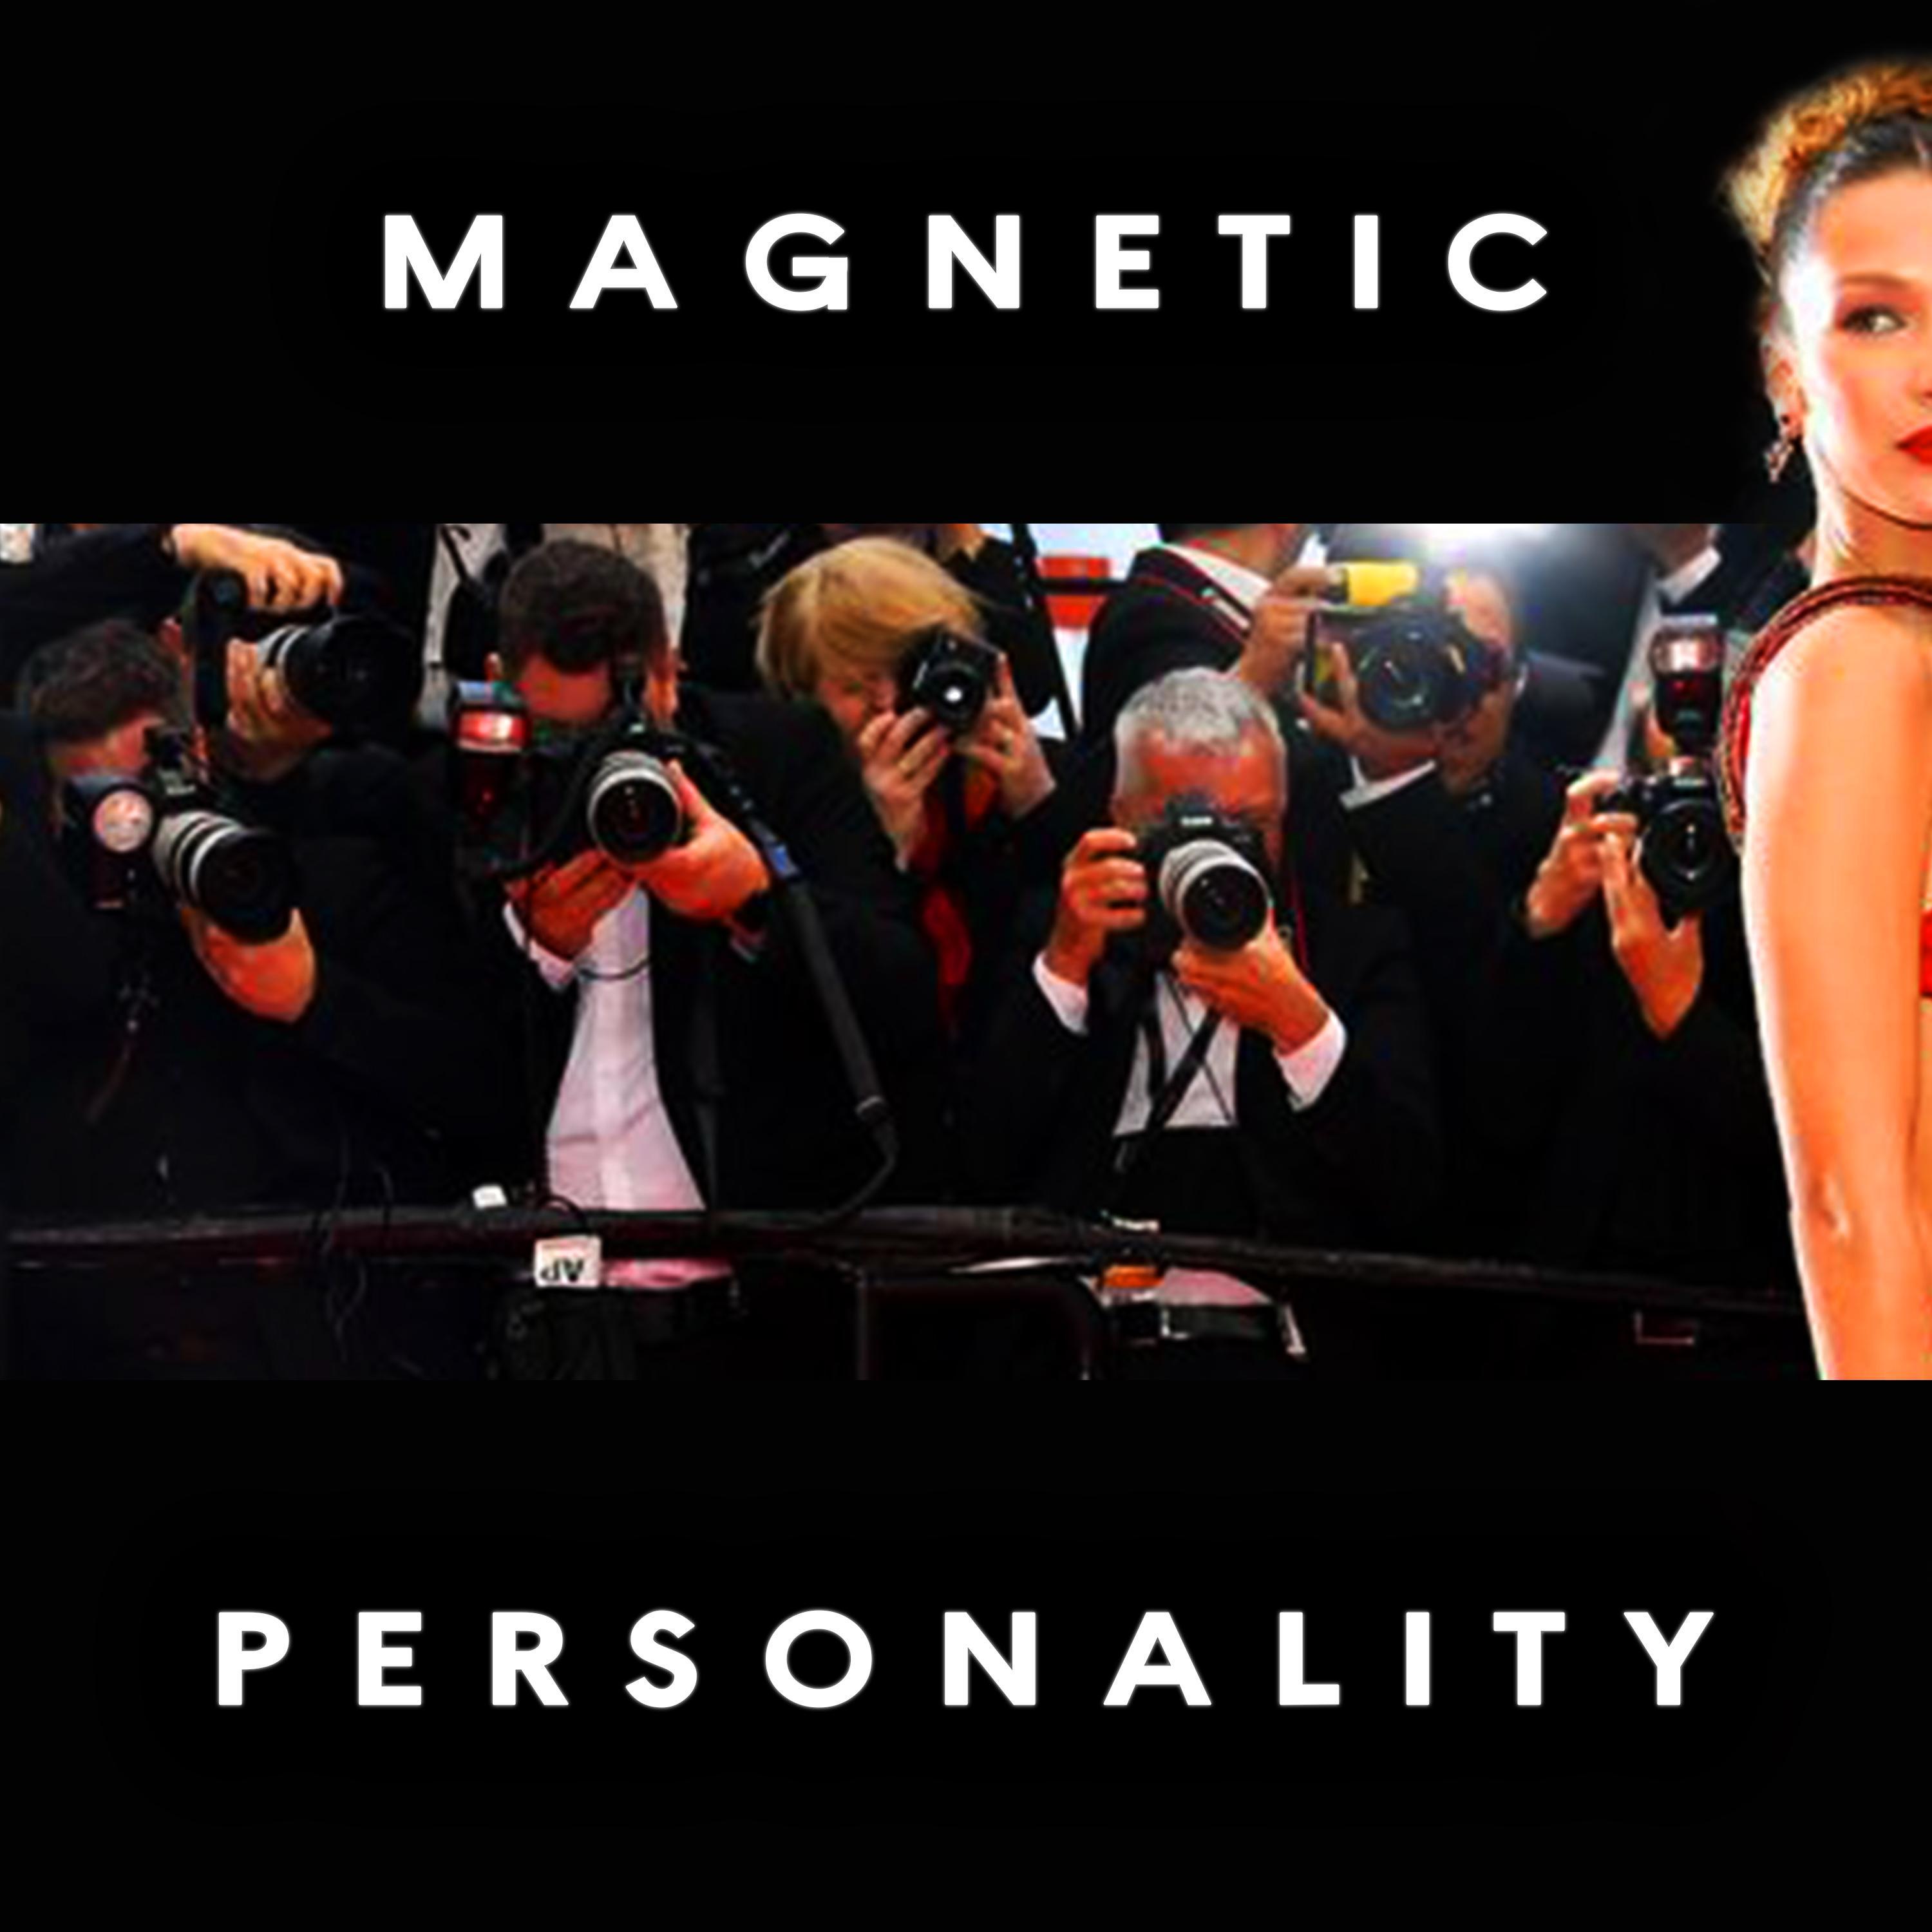 Sexy Subliminals - Magnetic Personality